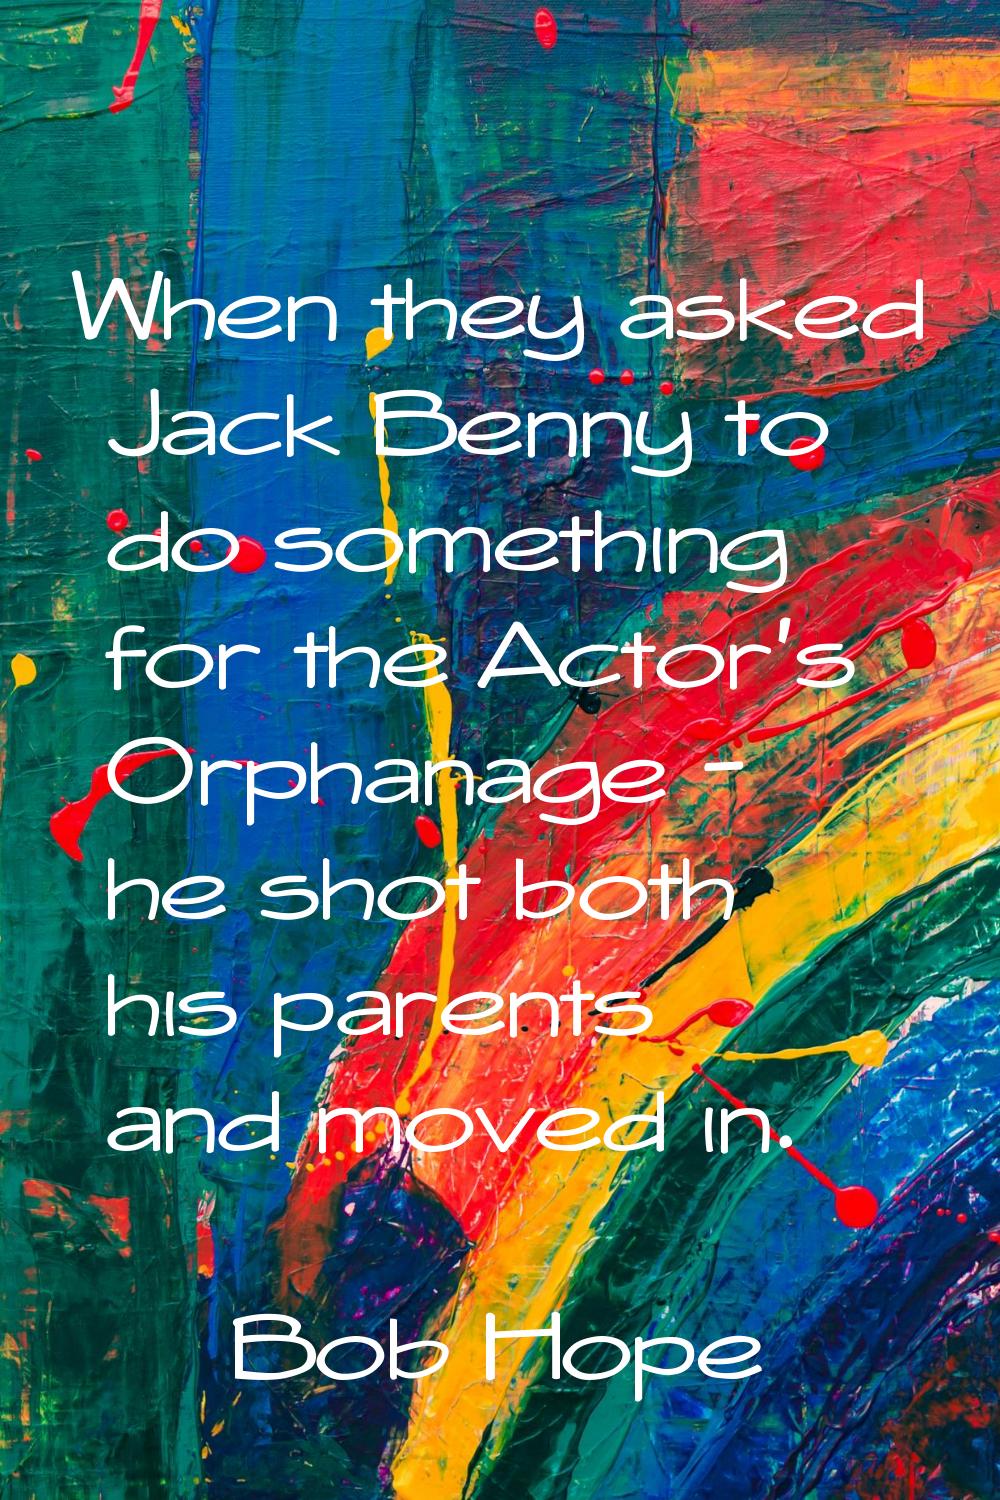 When they asked Jack Benny to do something for the Actor's Orphanage - he shot both his parents and